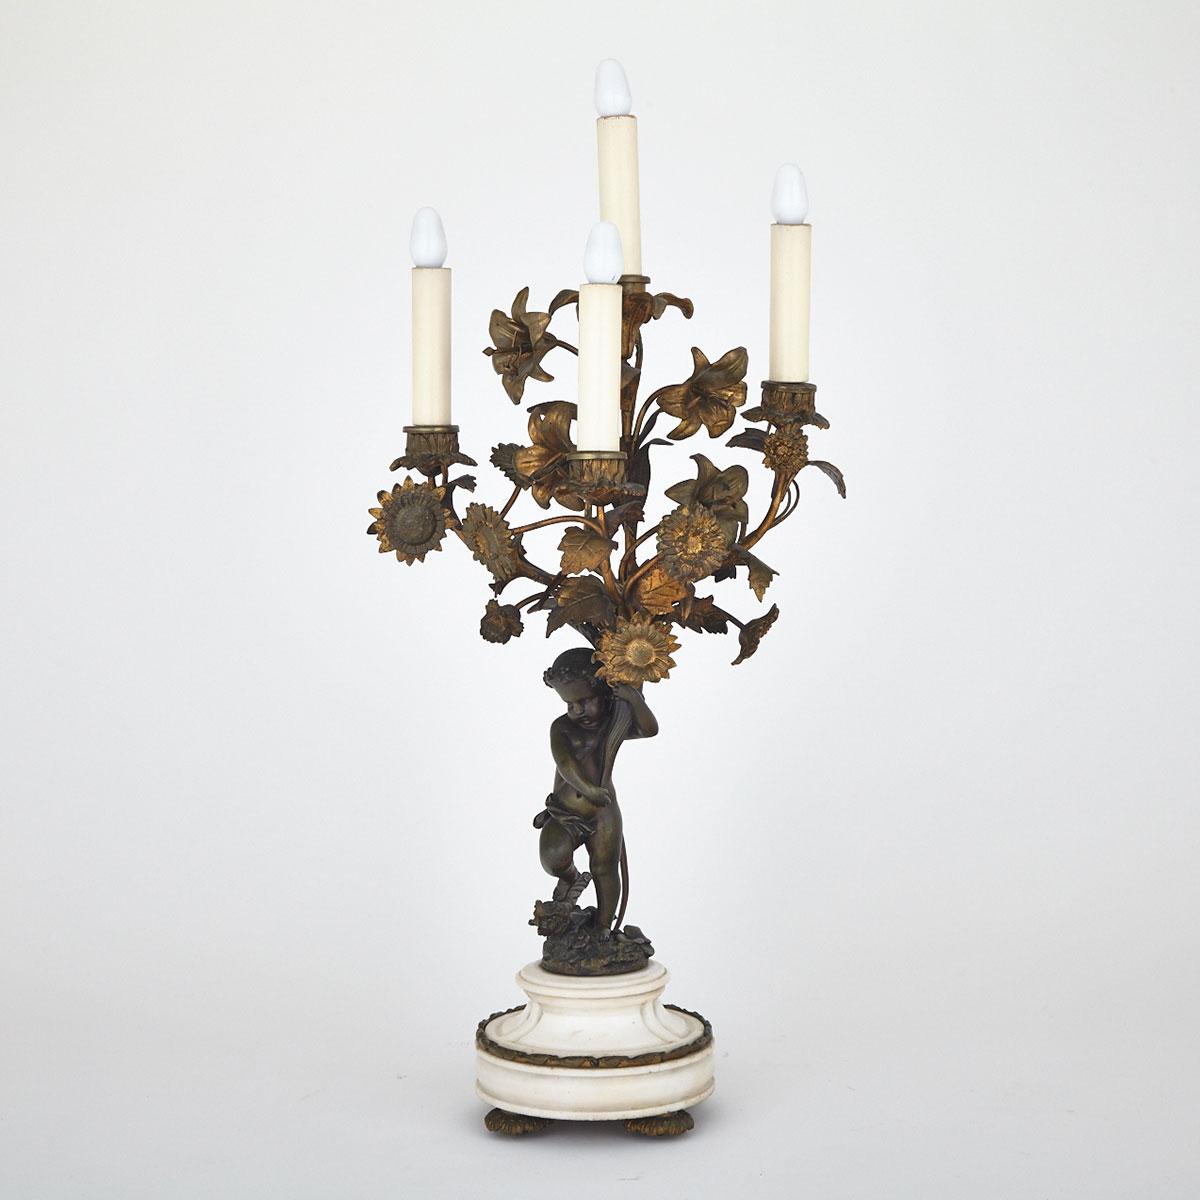 French Belle Epoque Gilt Bronze and Marble Figural Candelabrum, late 19th century